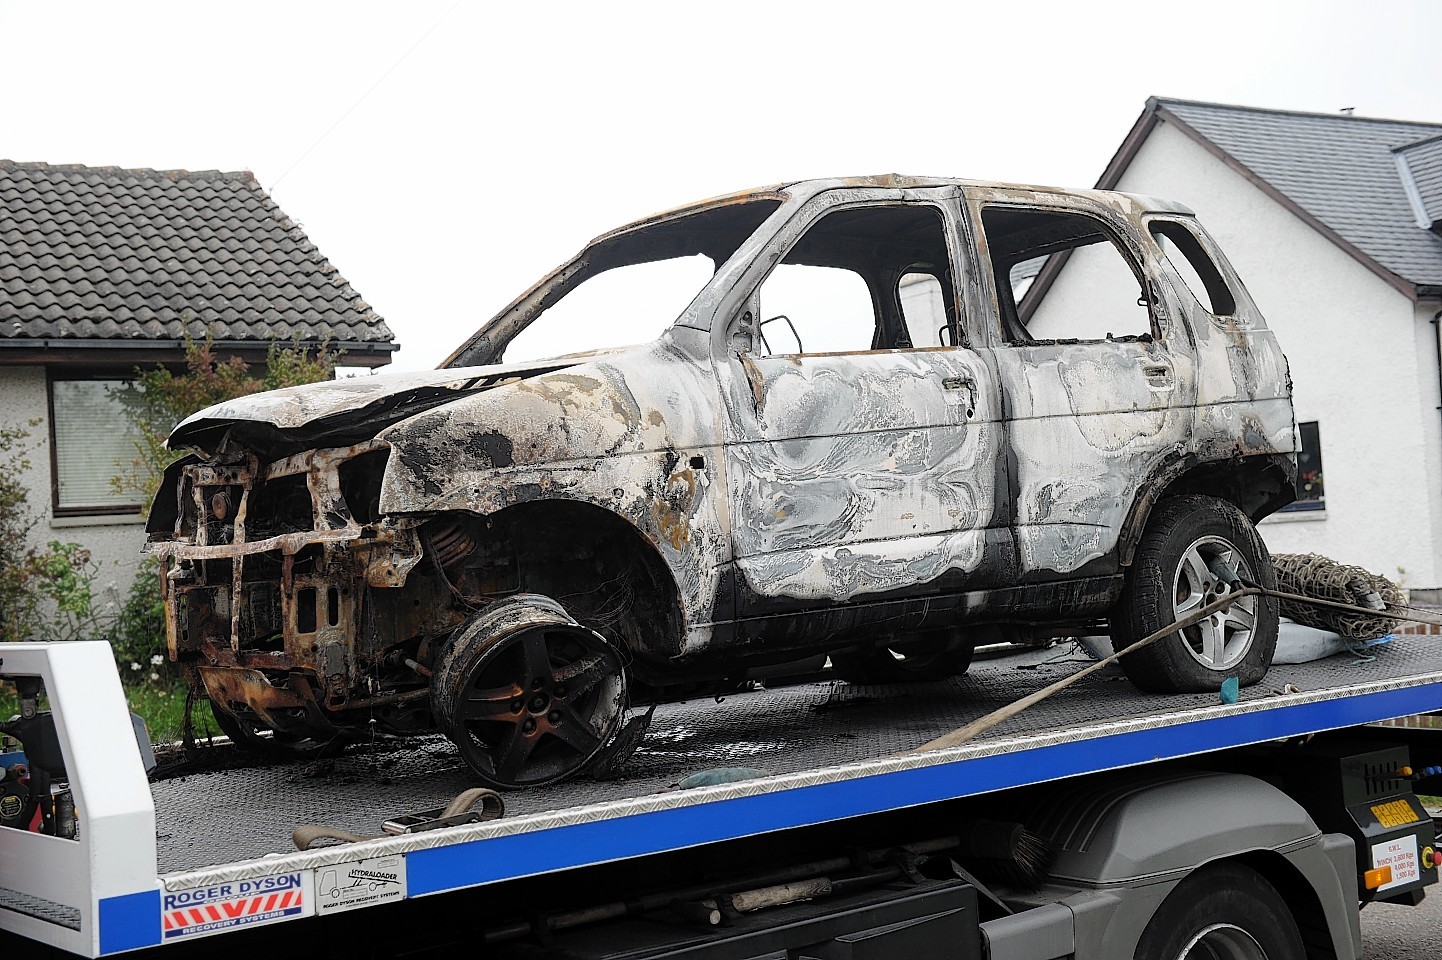 The vehicle which was destroyed at Newhall.